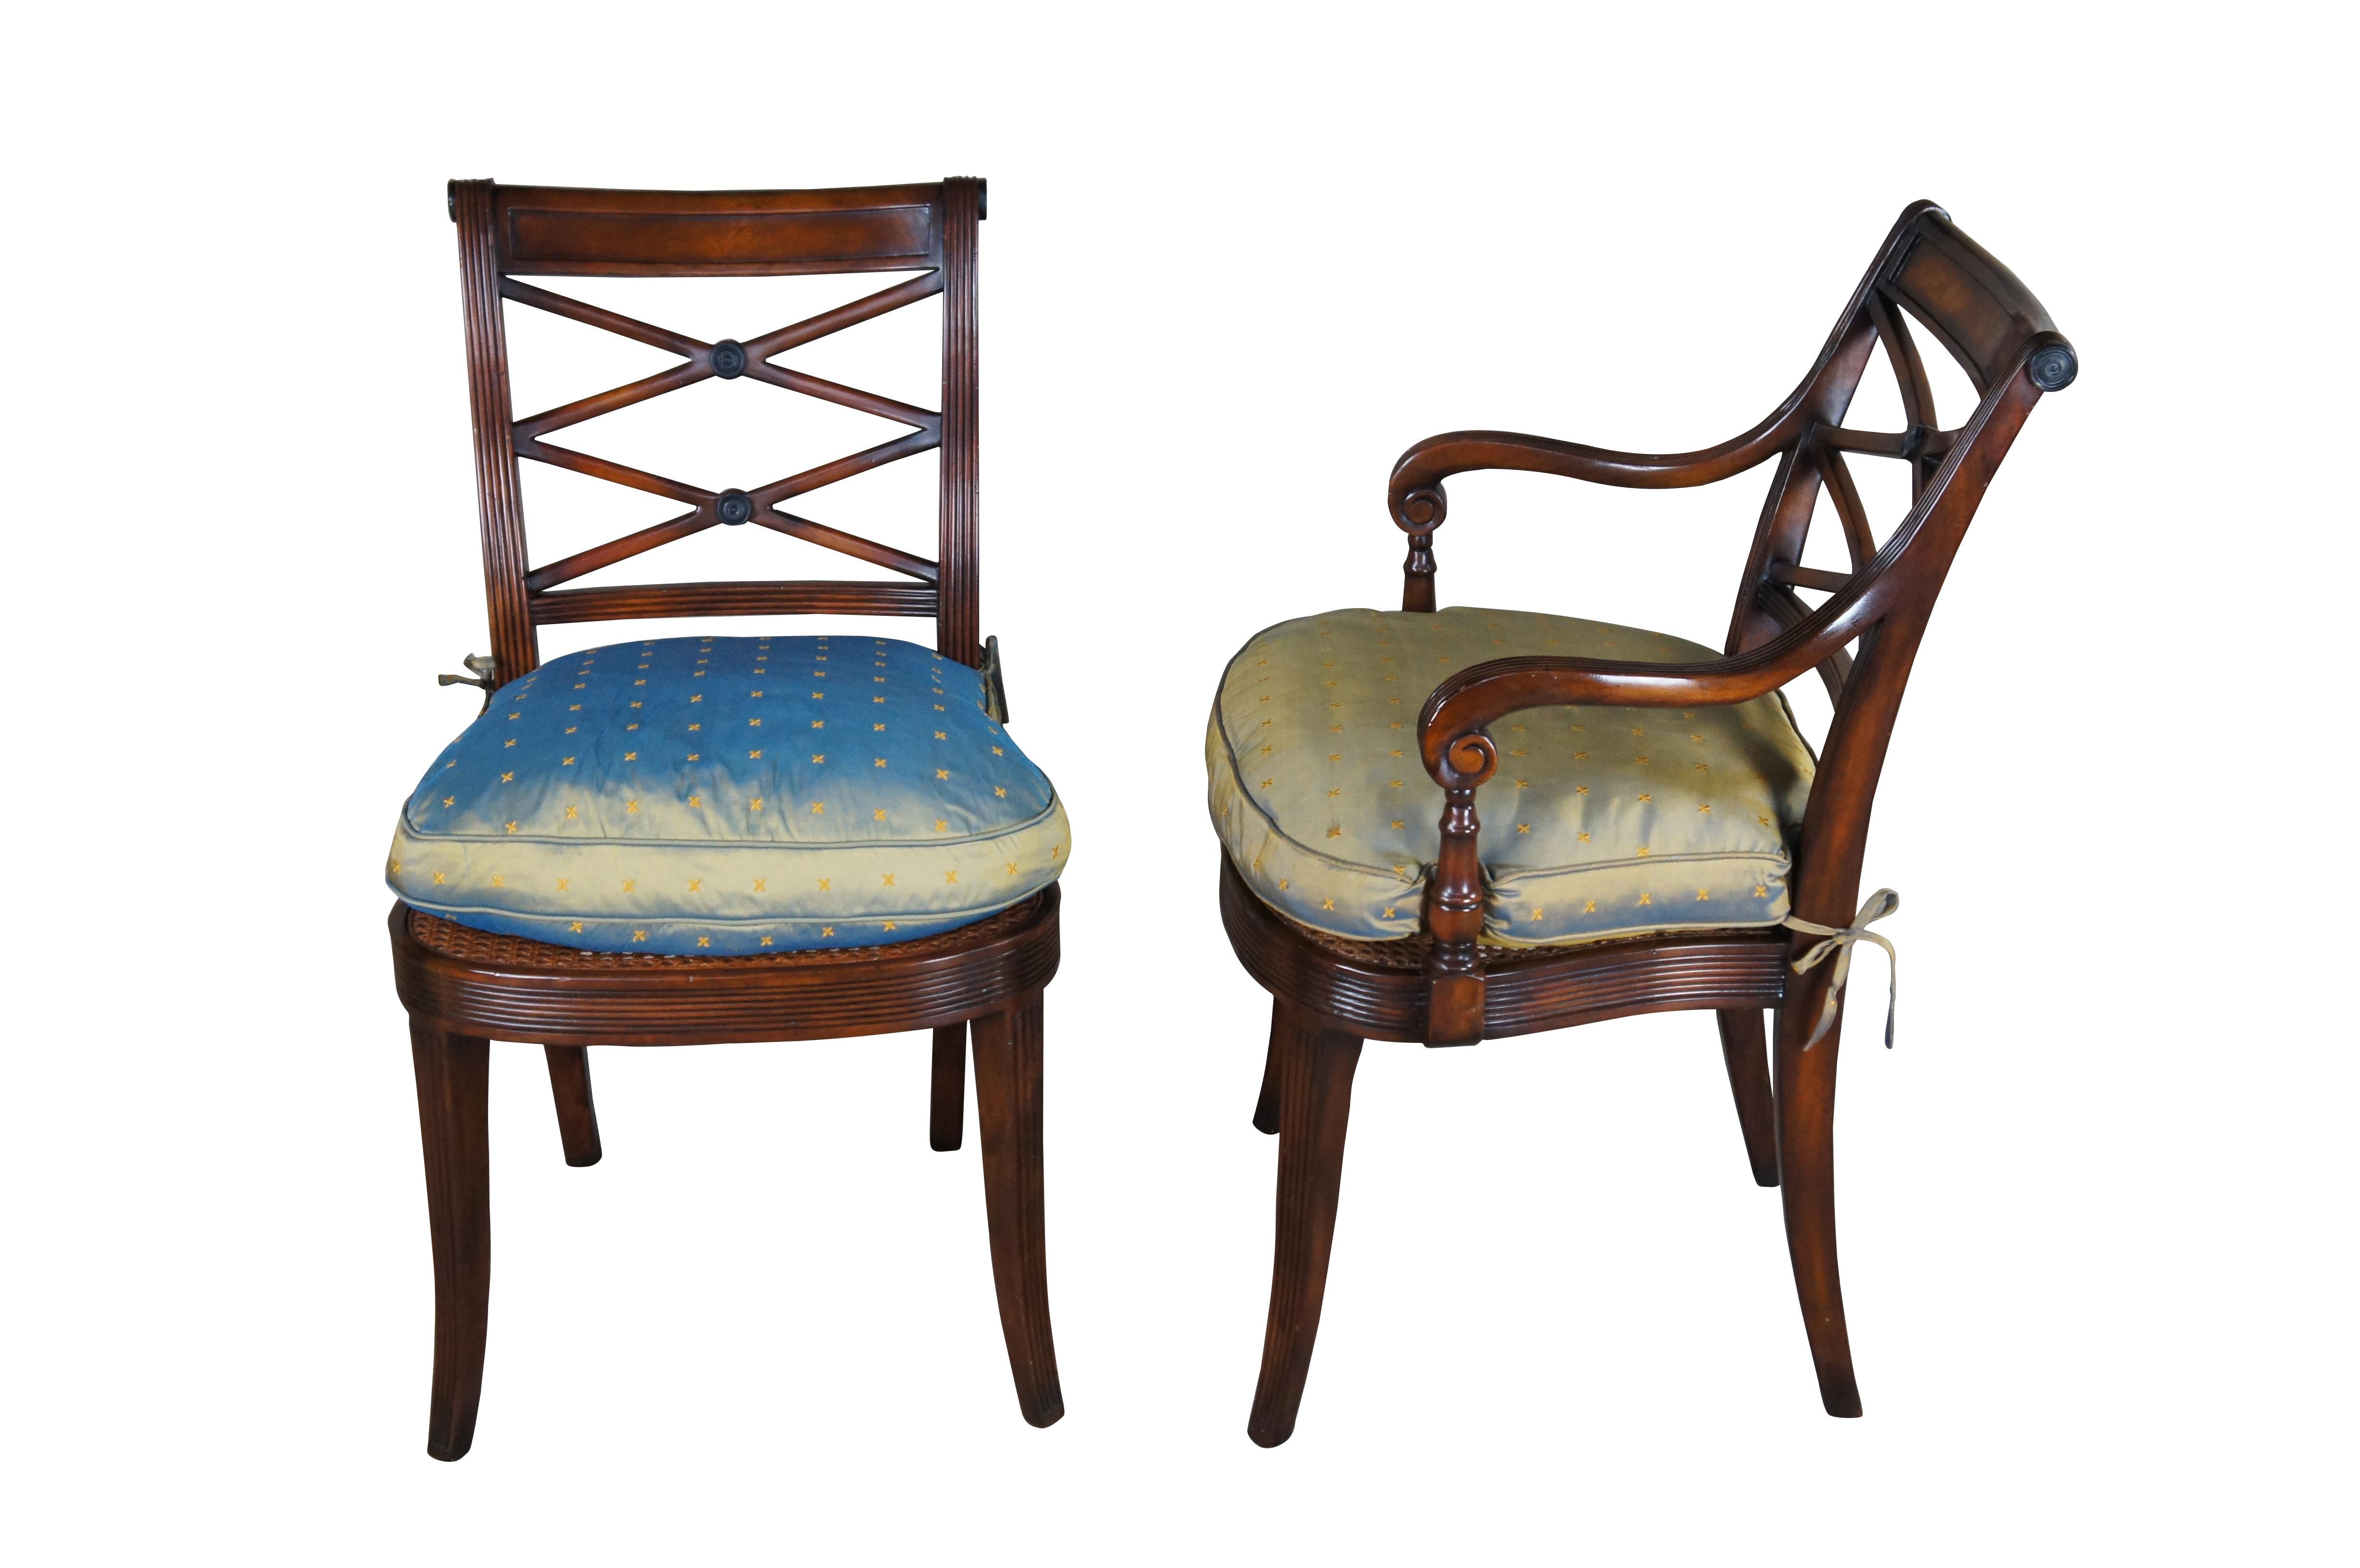 Theodore Alexander 4100. A hand carved armchair with reeded decoration, the over scroll and double 'X' pierced back above a cane seat with upholstered downfilled cushion. The chairs are made from mahogany and feature sabre legs.

Dimensions:
20